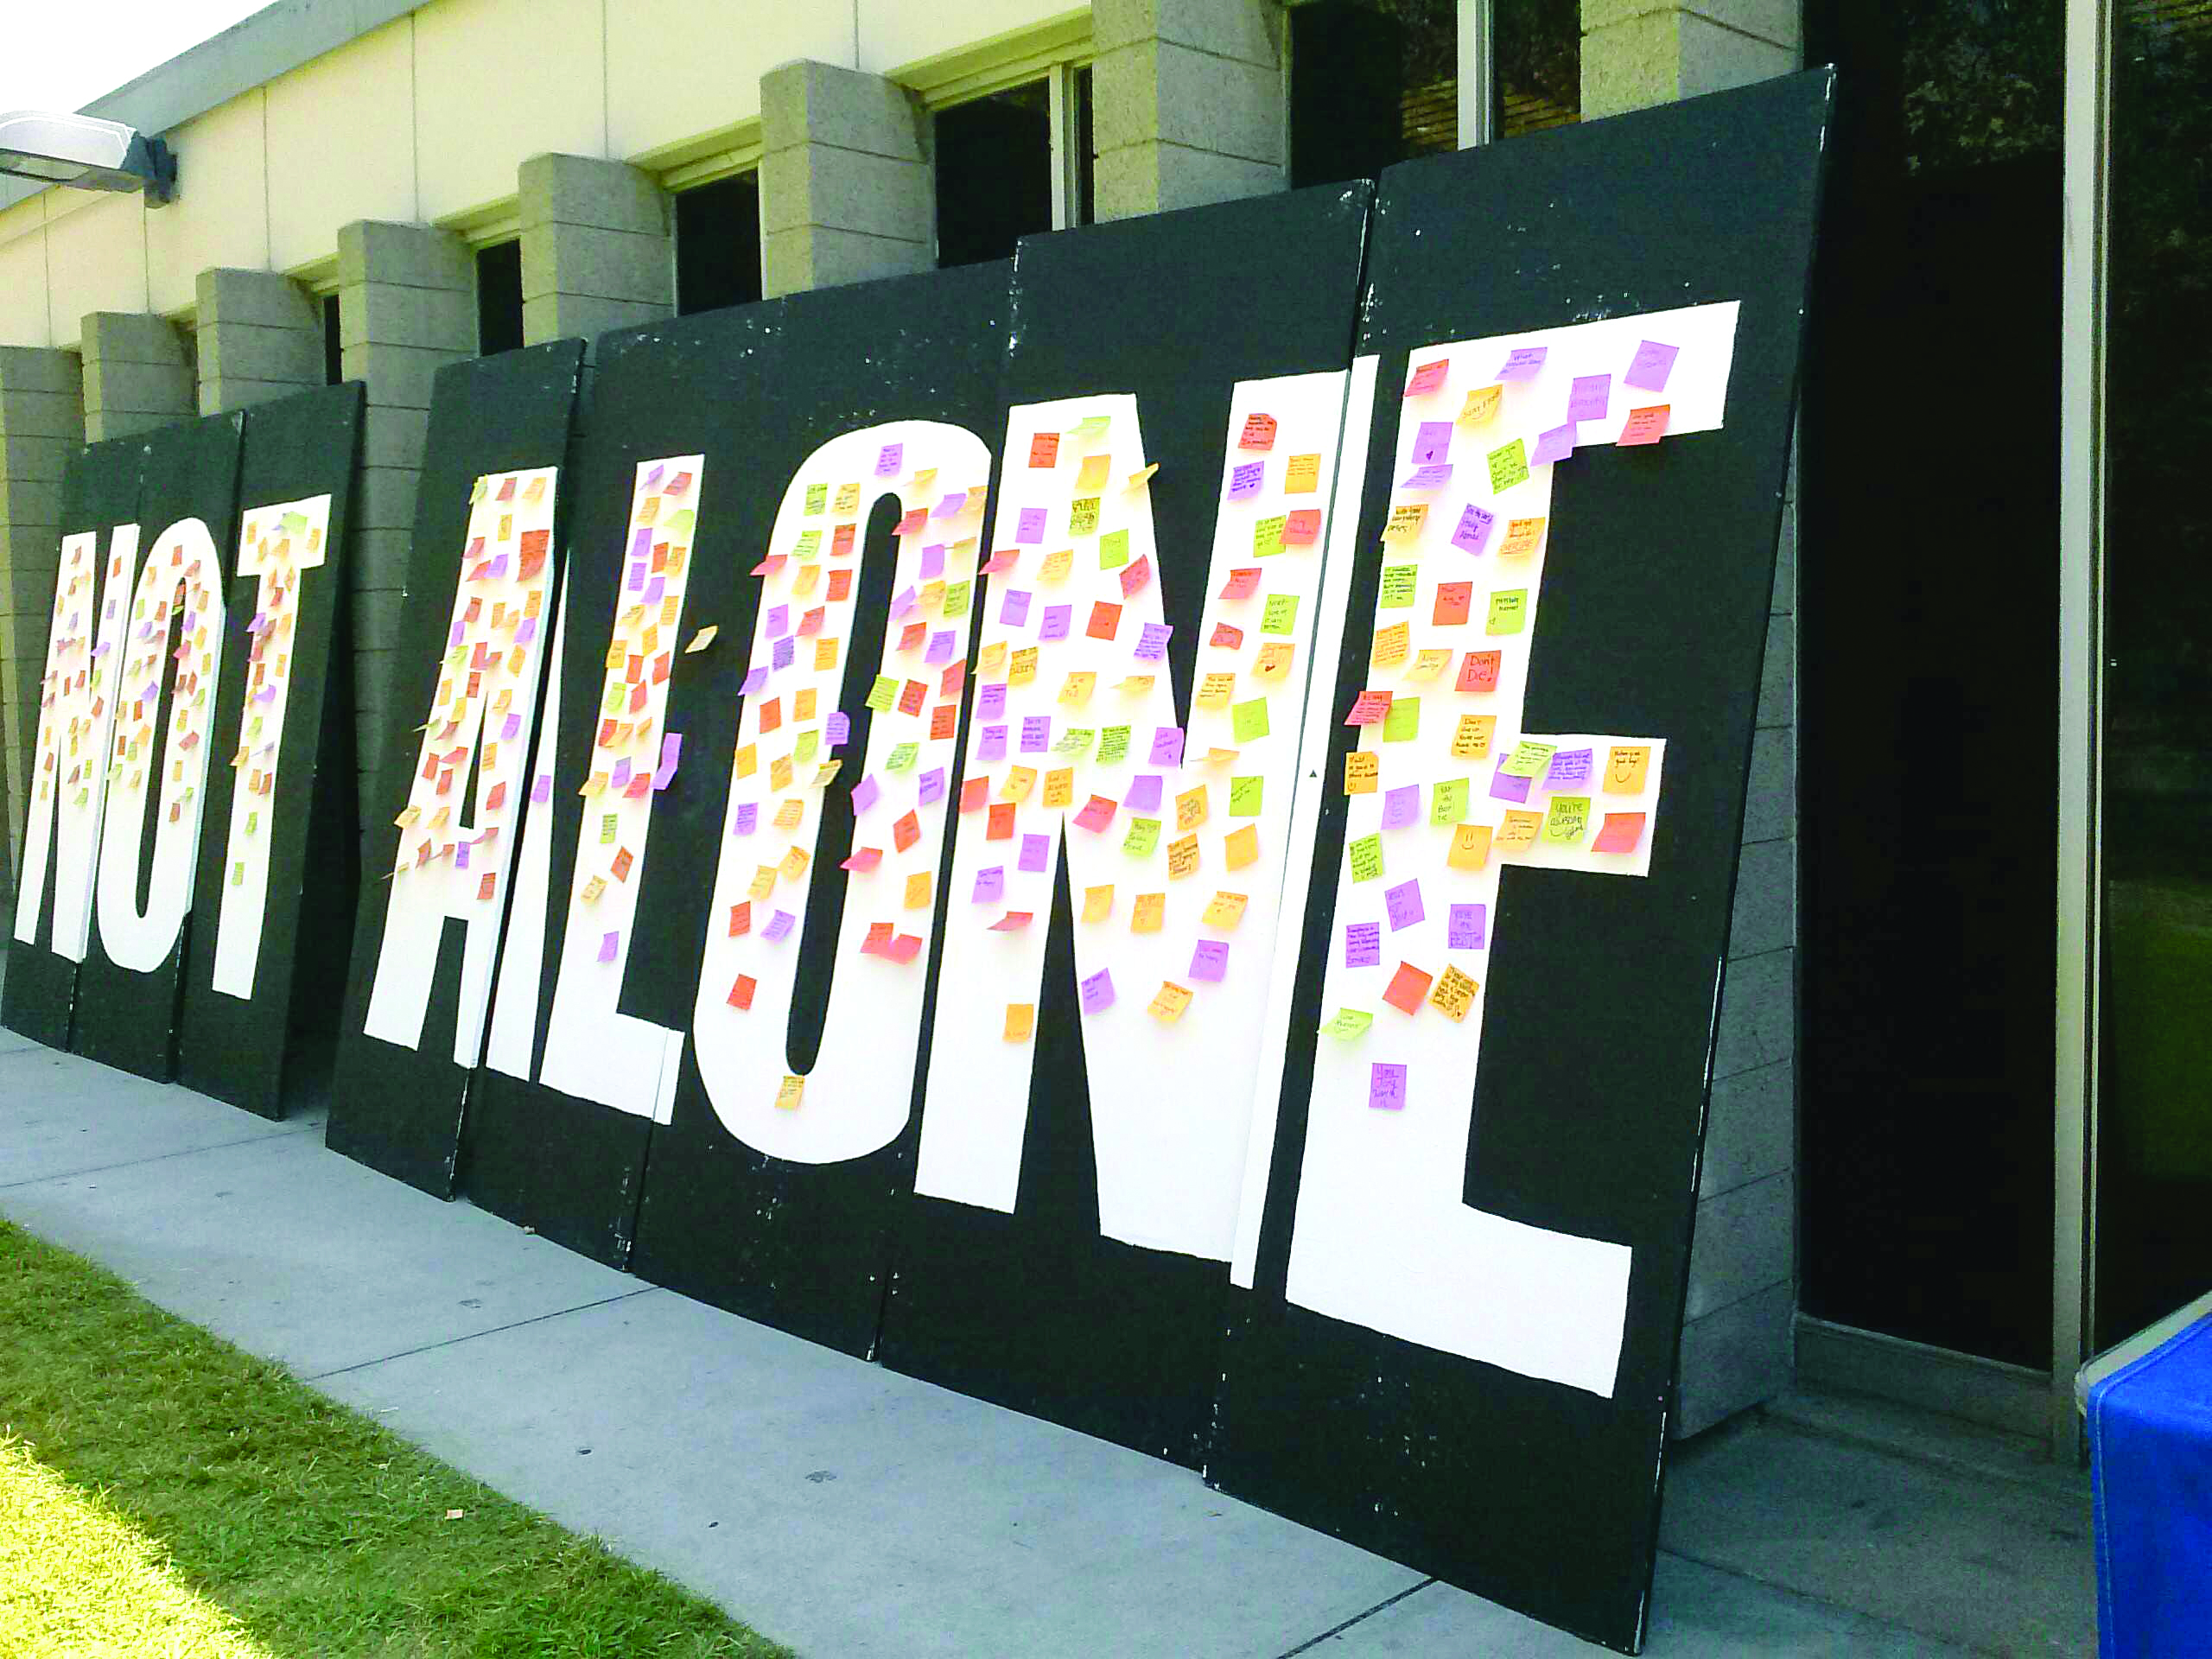 Student government to raise issue of suicide awareness